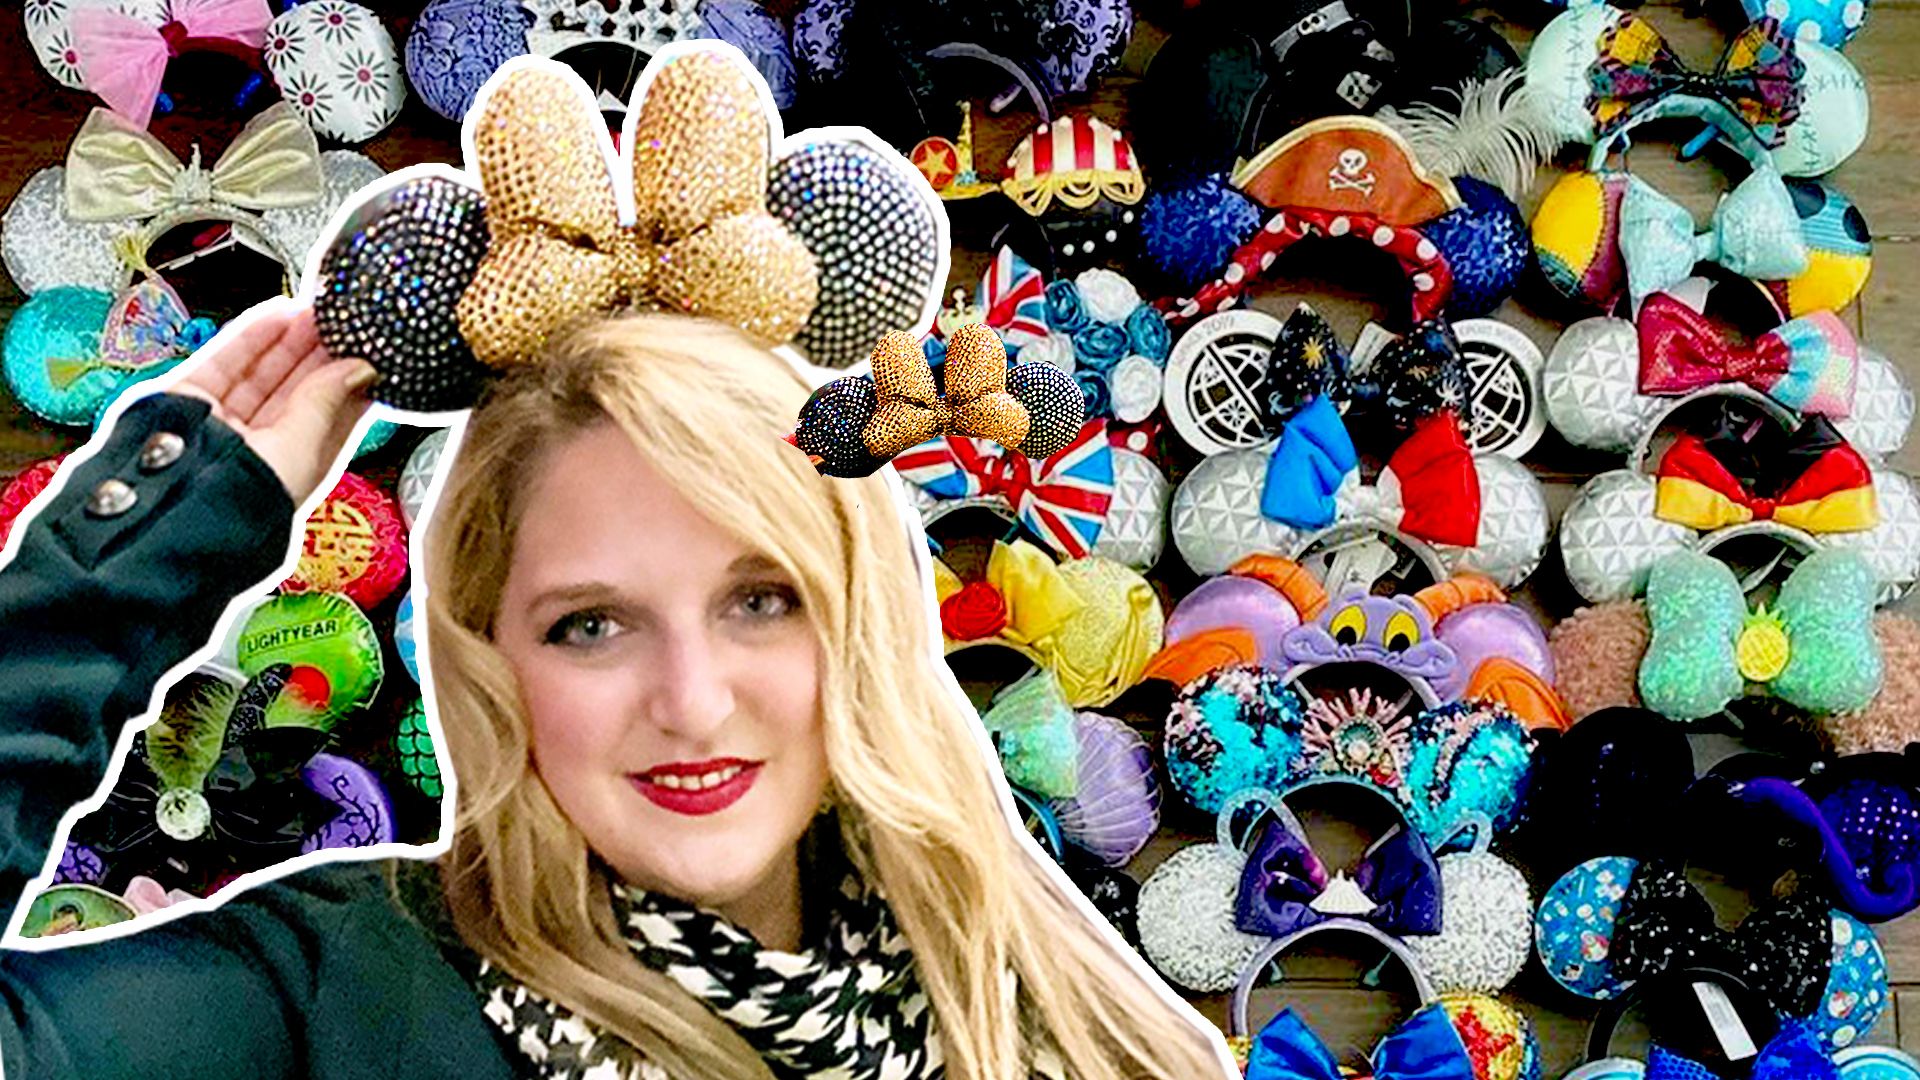 This Disney Fan Has Collected 600 Minnie Mouse Ears